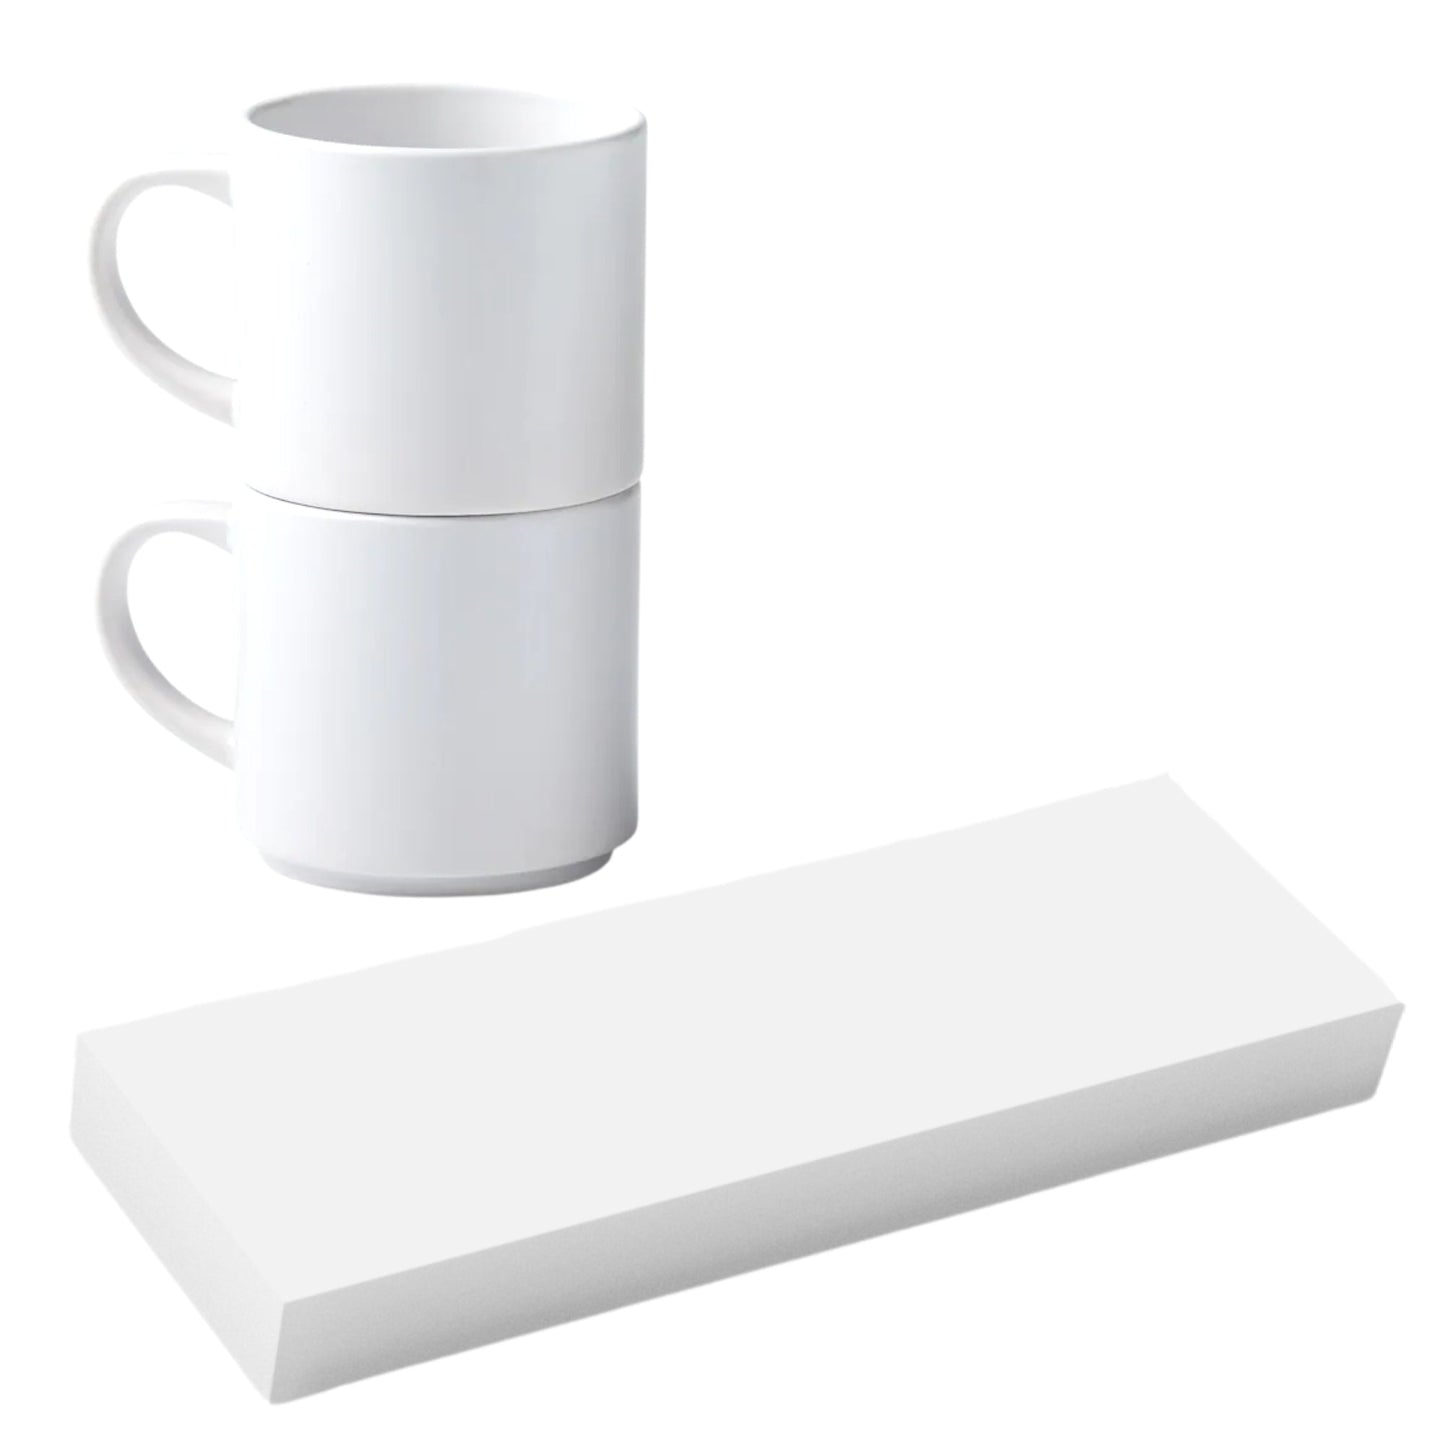 Precut Butcher Paper Sheets for Sublimation Mugs (3 Size Pack, fit 10oz, 11/12 oz Mugs & 15 oz Mugs perfectly), White, Uncoated